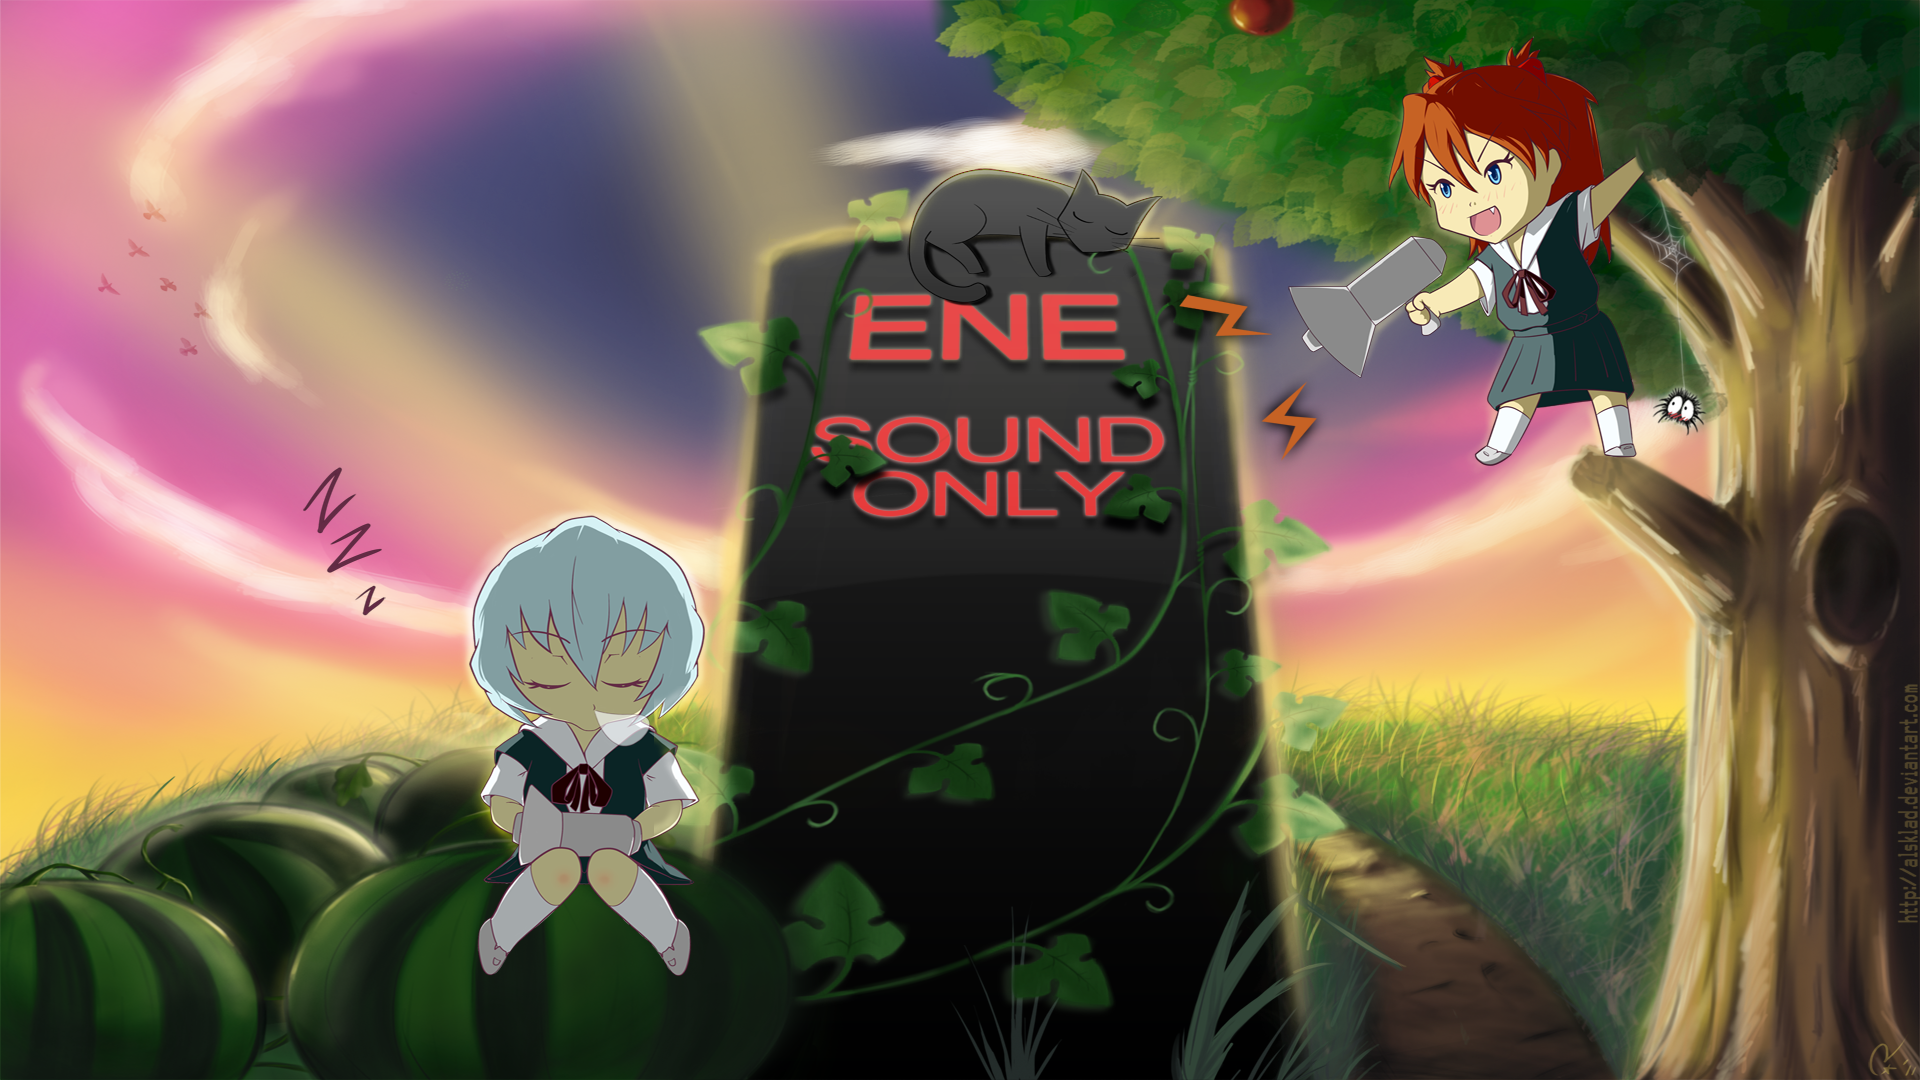 ENE Sound only